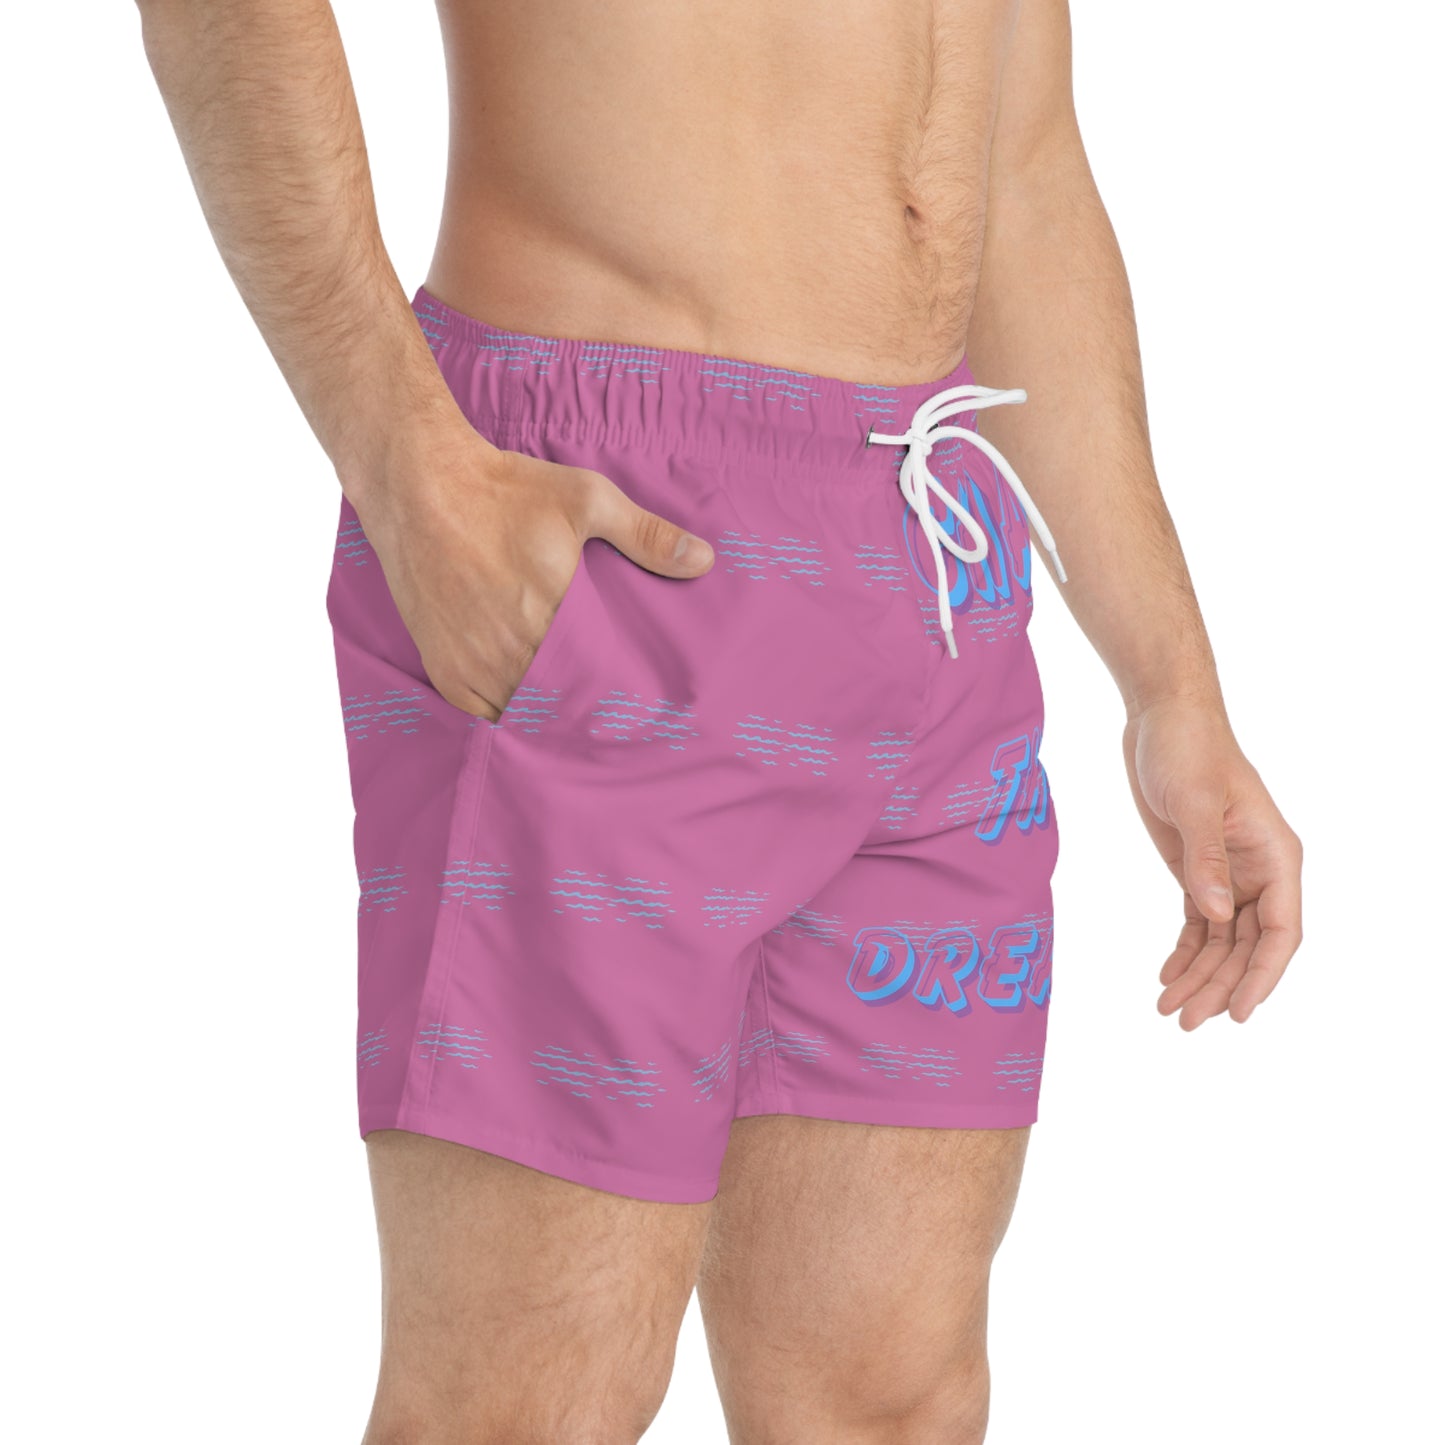 Chase the Dream Pink Swim Trunks